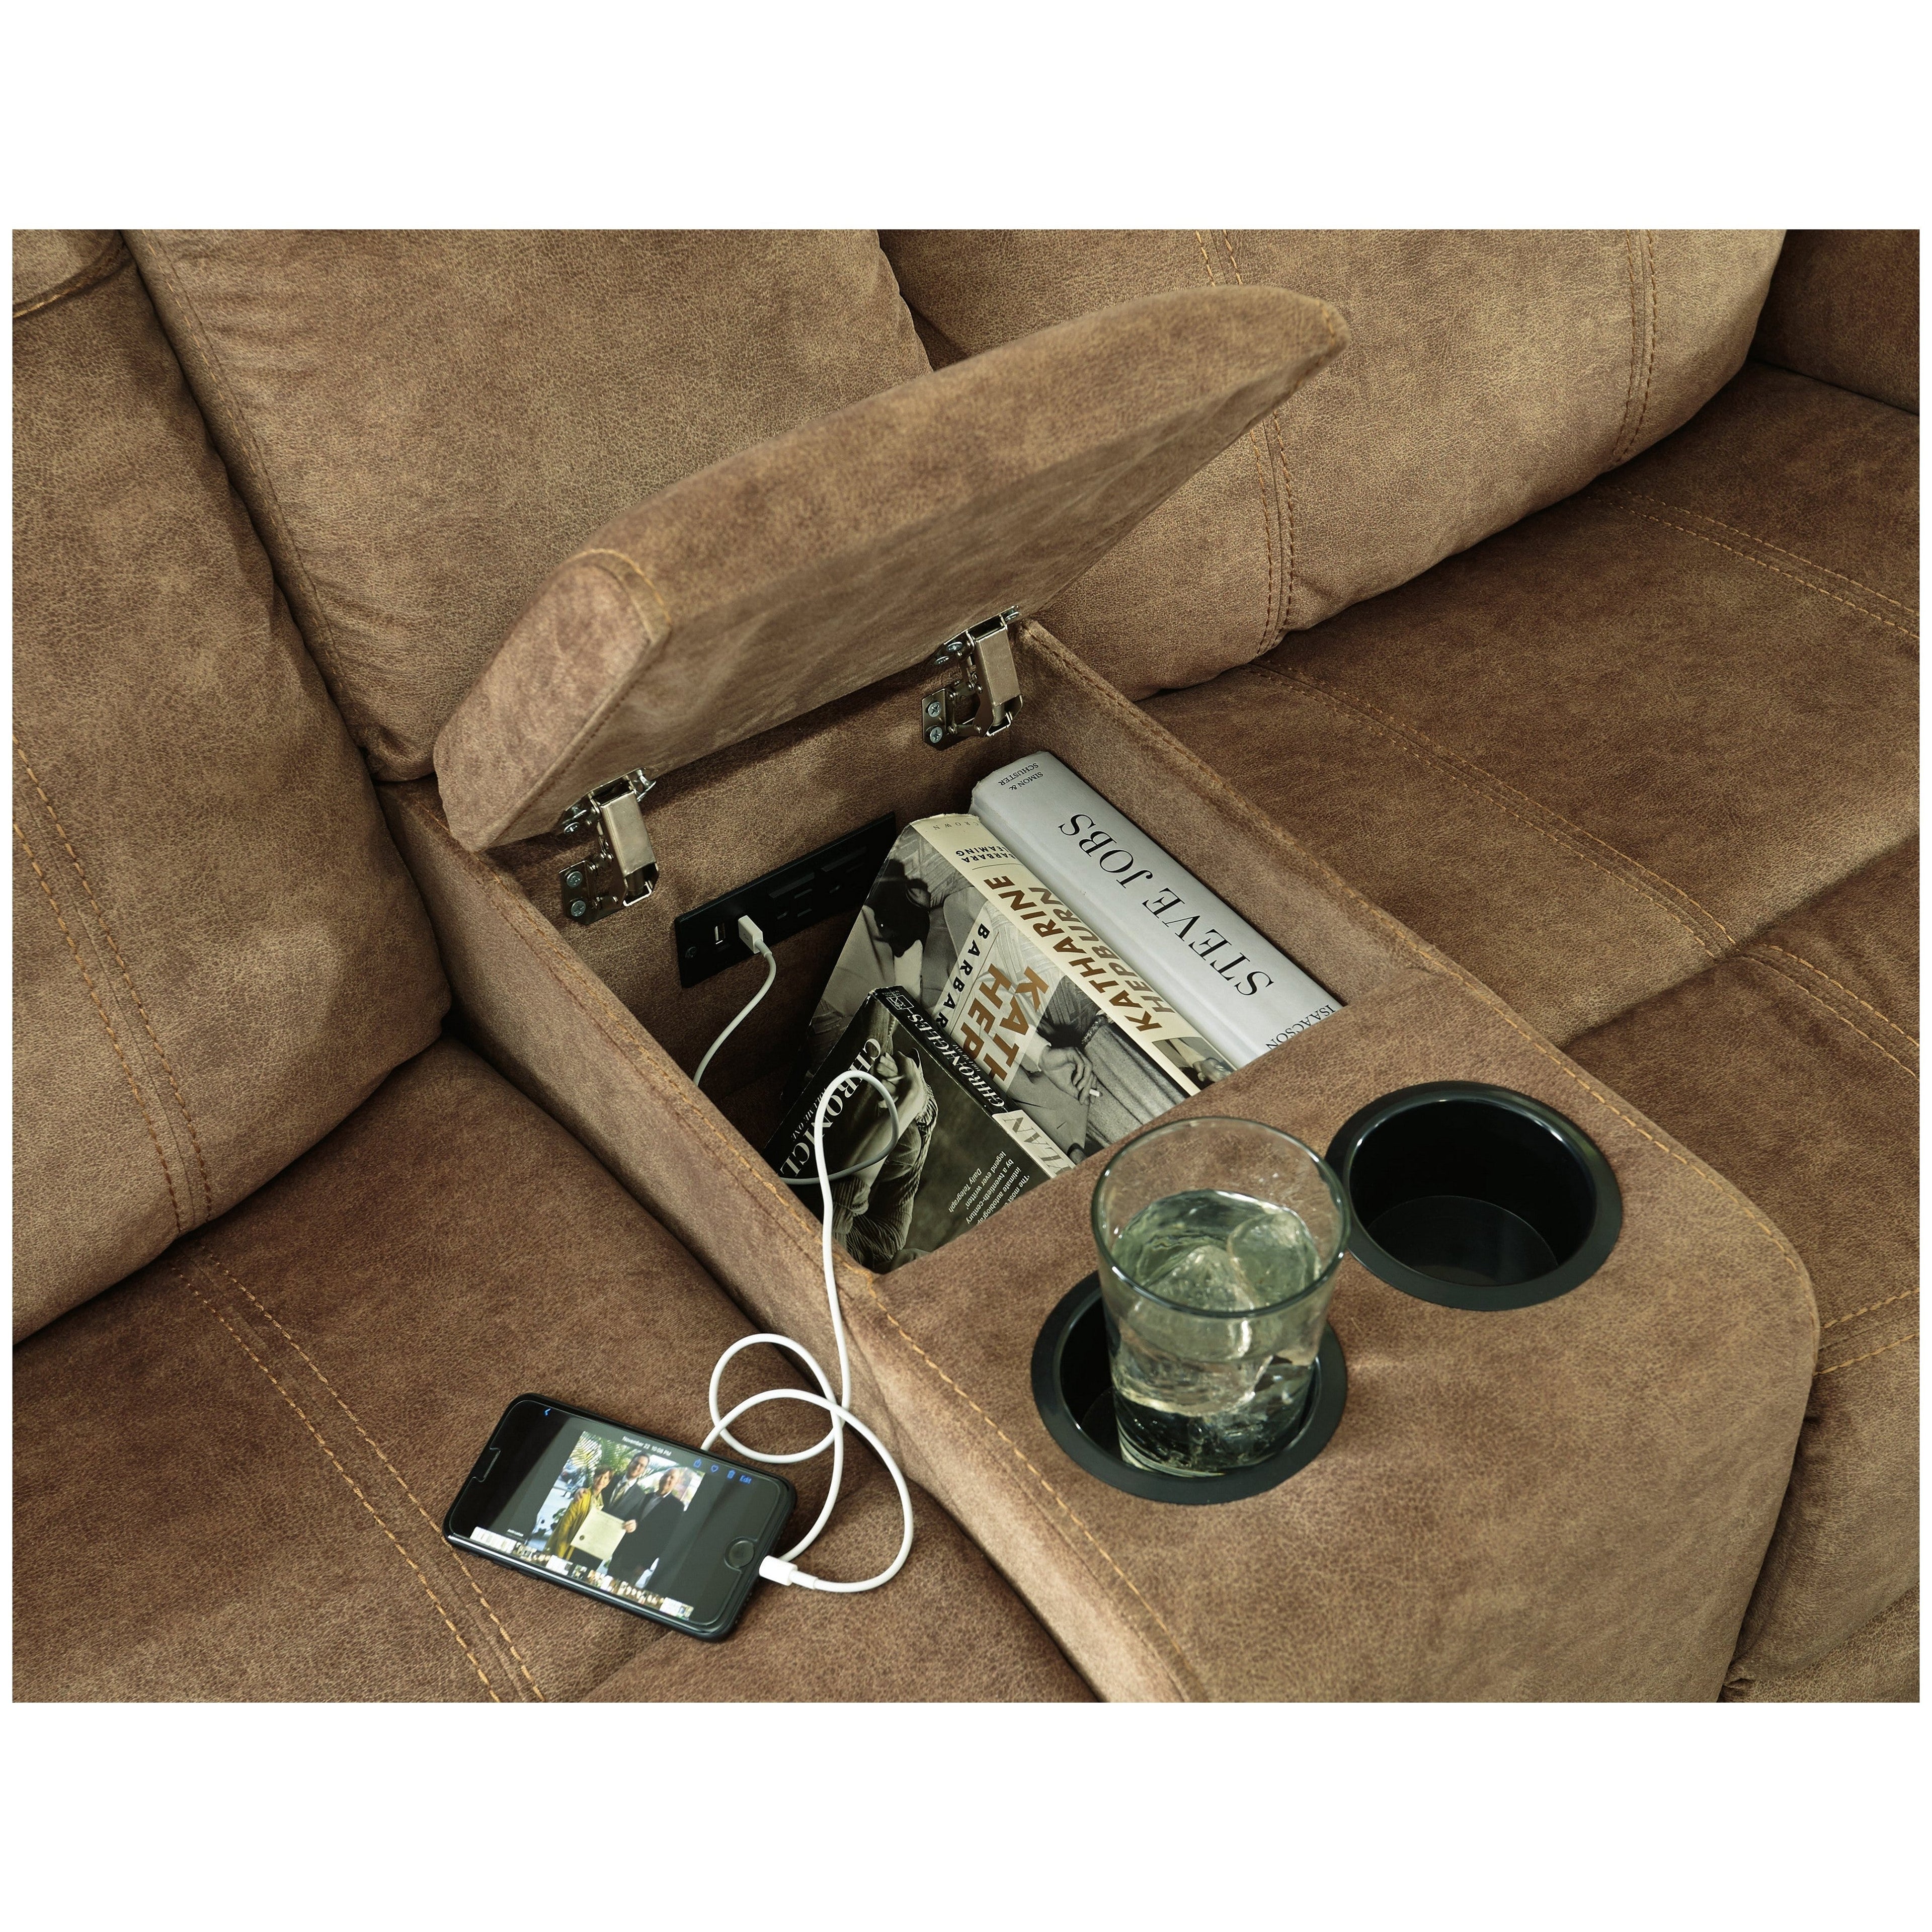 Huddle-Up Glider Reclining Loveseat with Console Ash-8230494